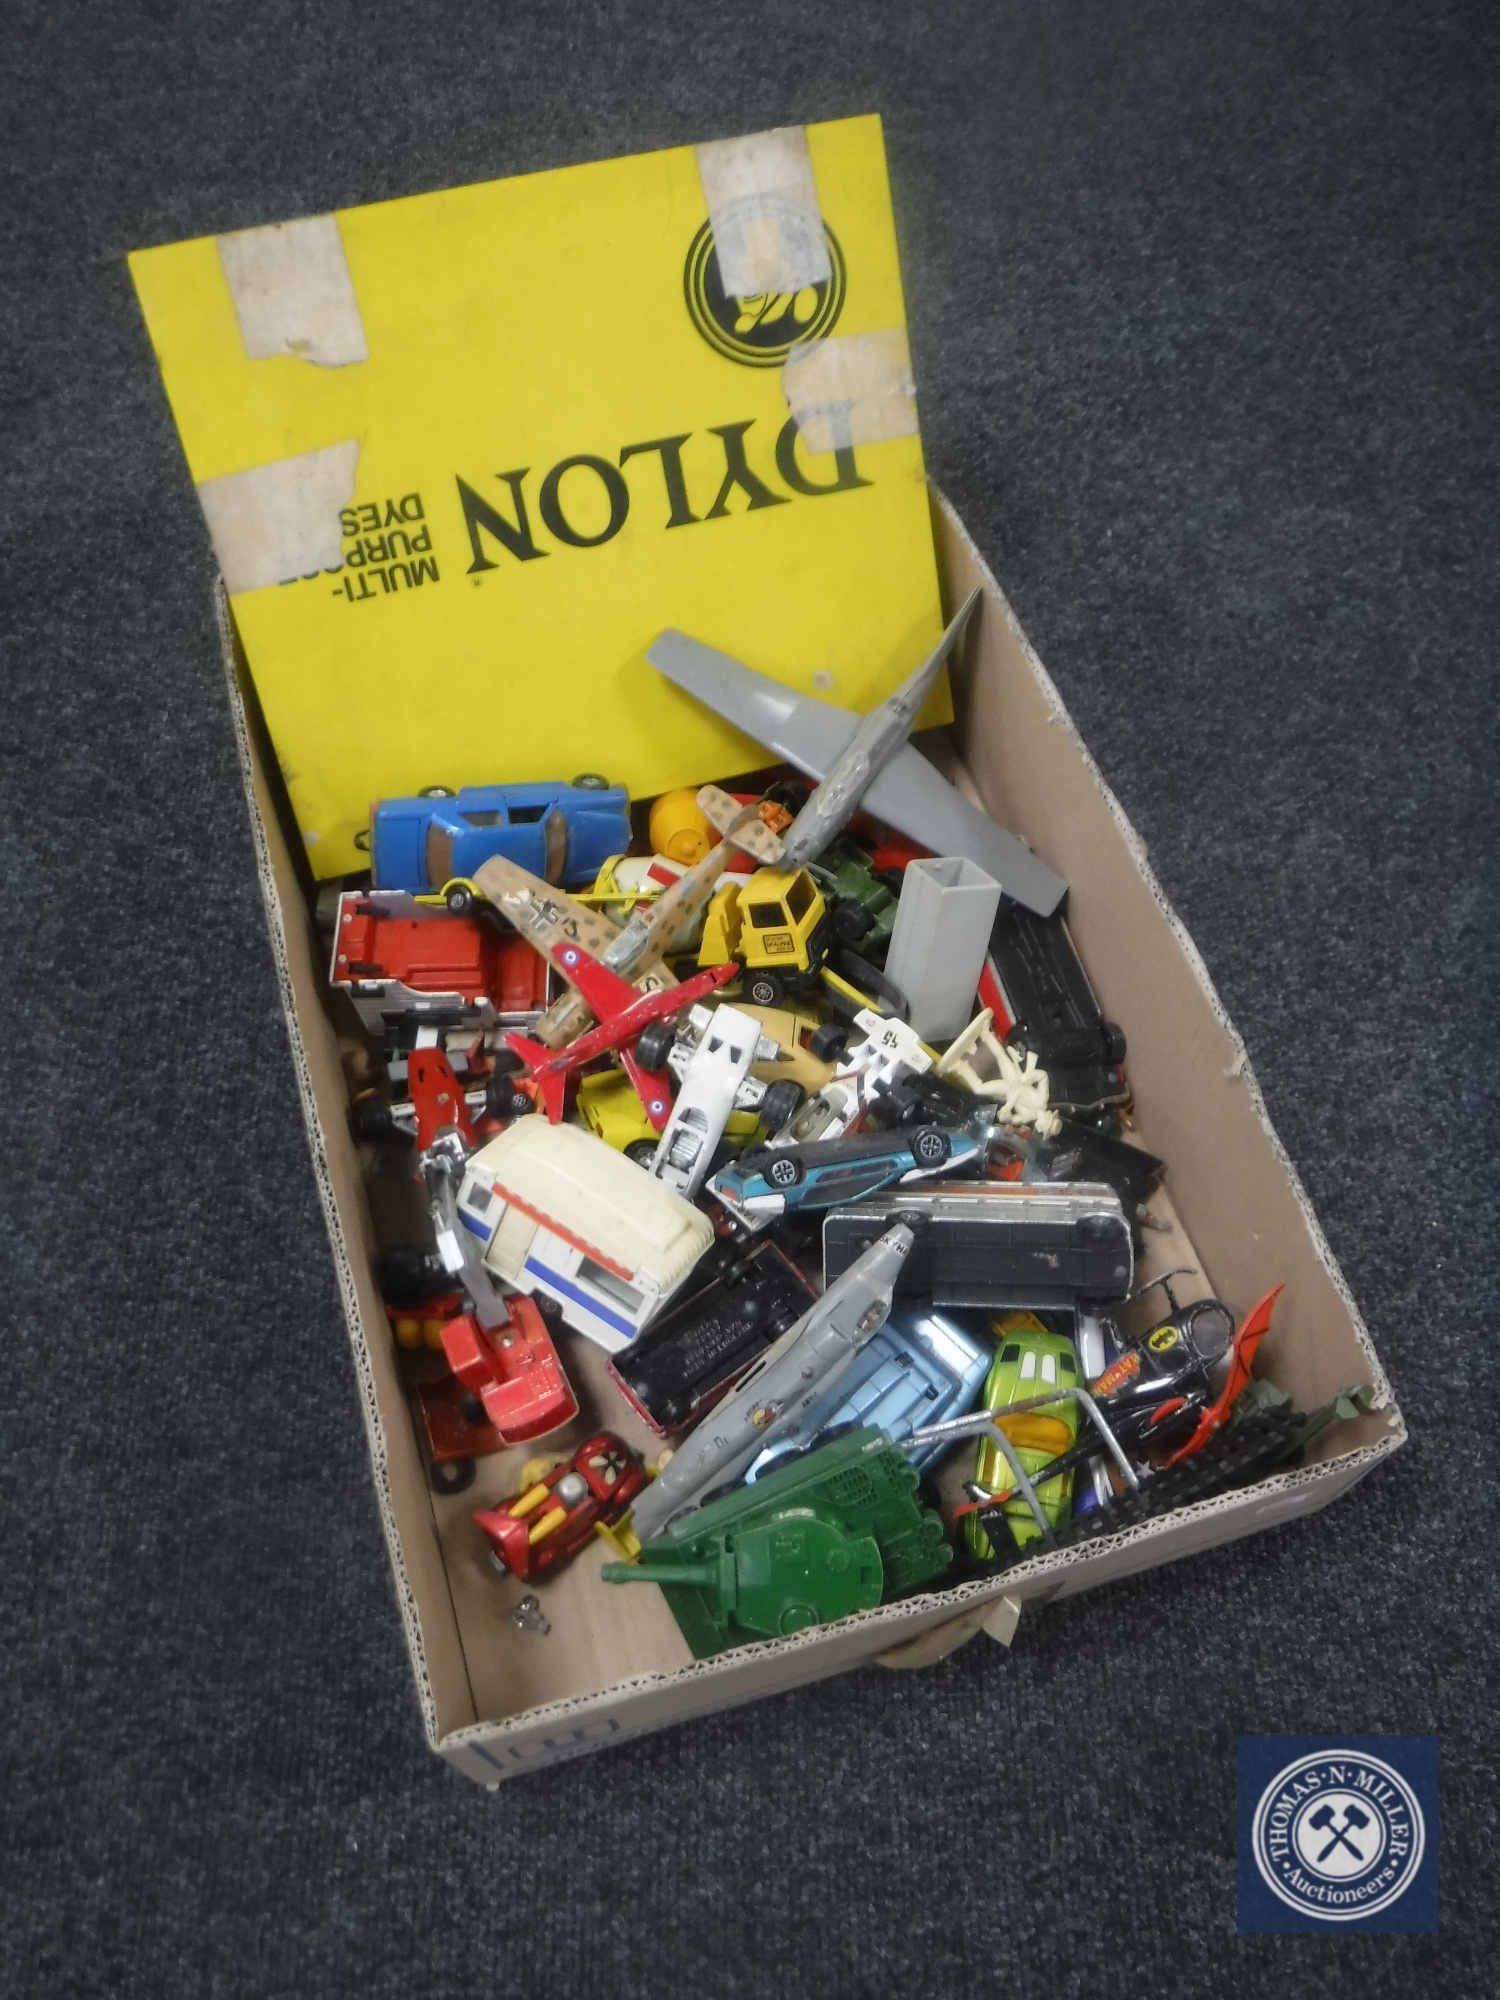 A box of mid 20th century and later die cast vehicles - Dinky Bedford van, Batman helicopter,